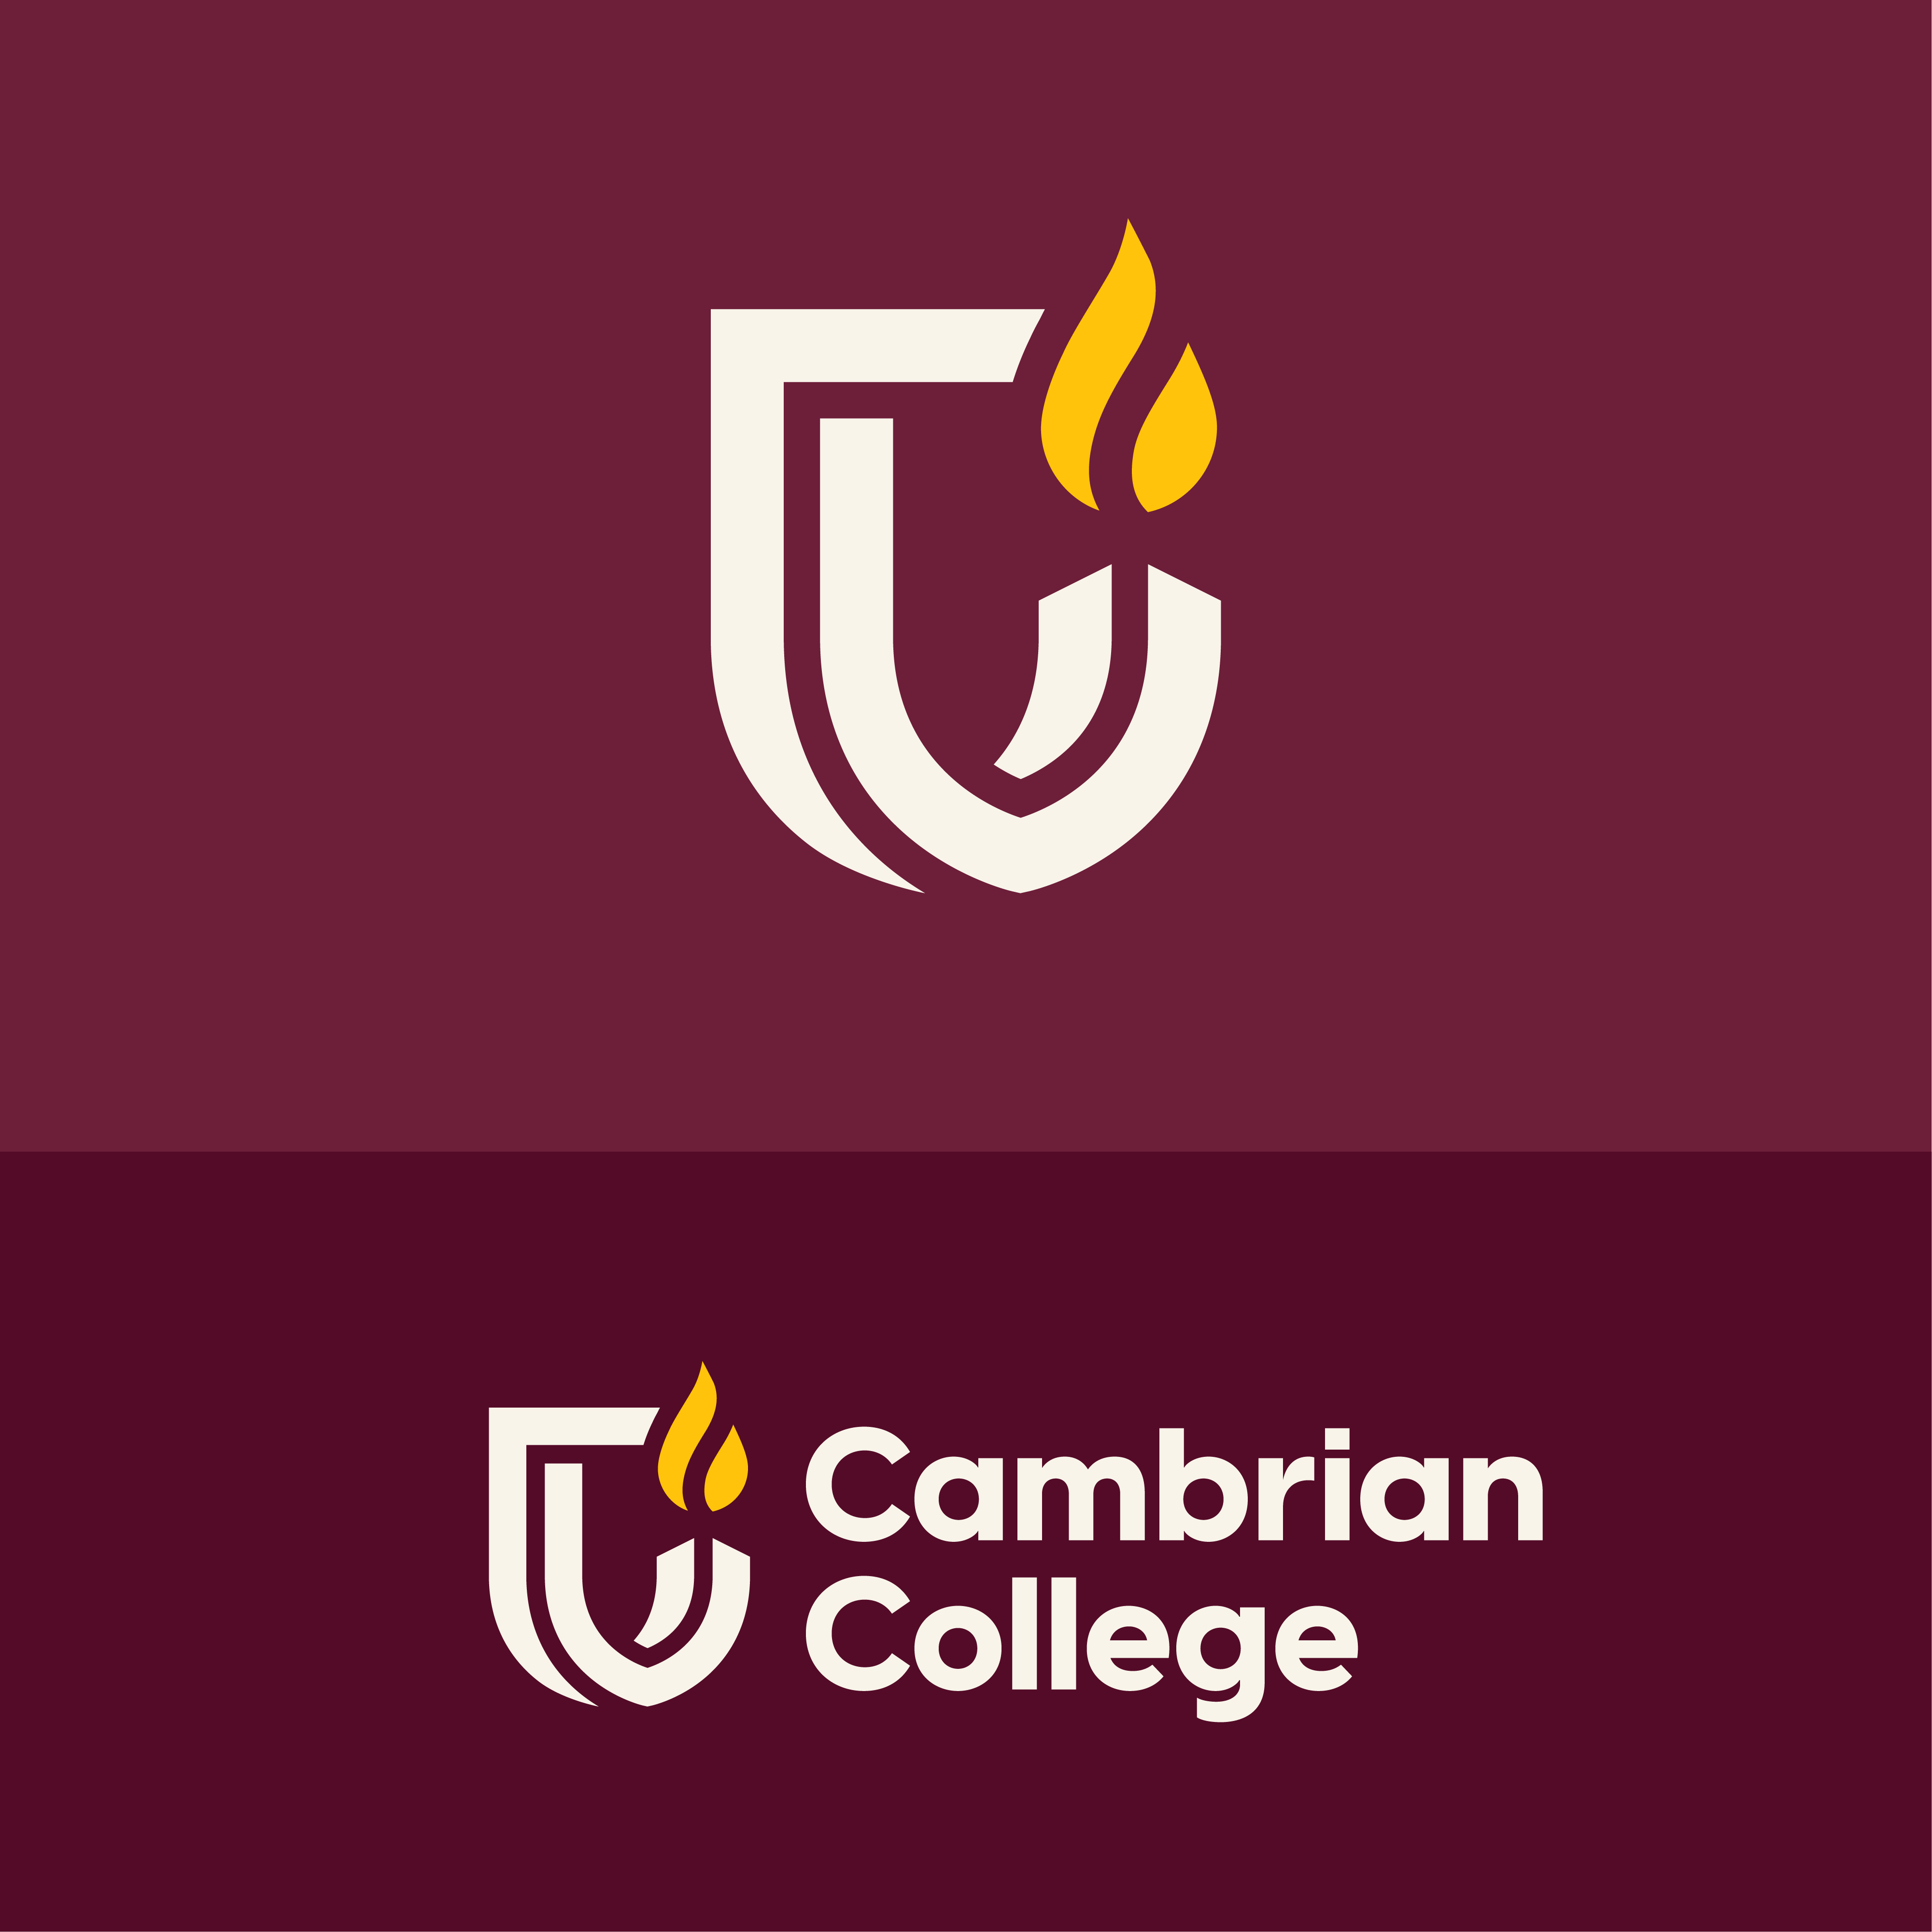 Cambrian College logo symbol displayed with Cambrian wordmark below on a burgundy background